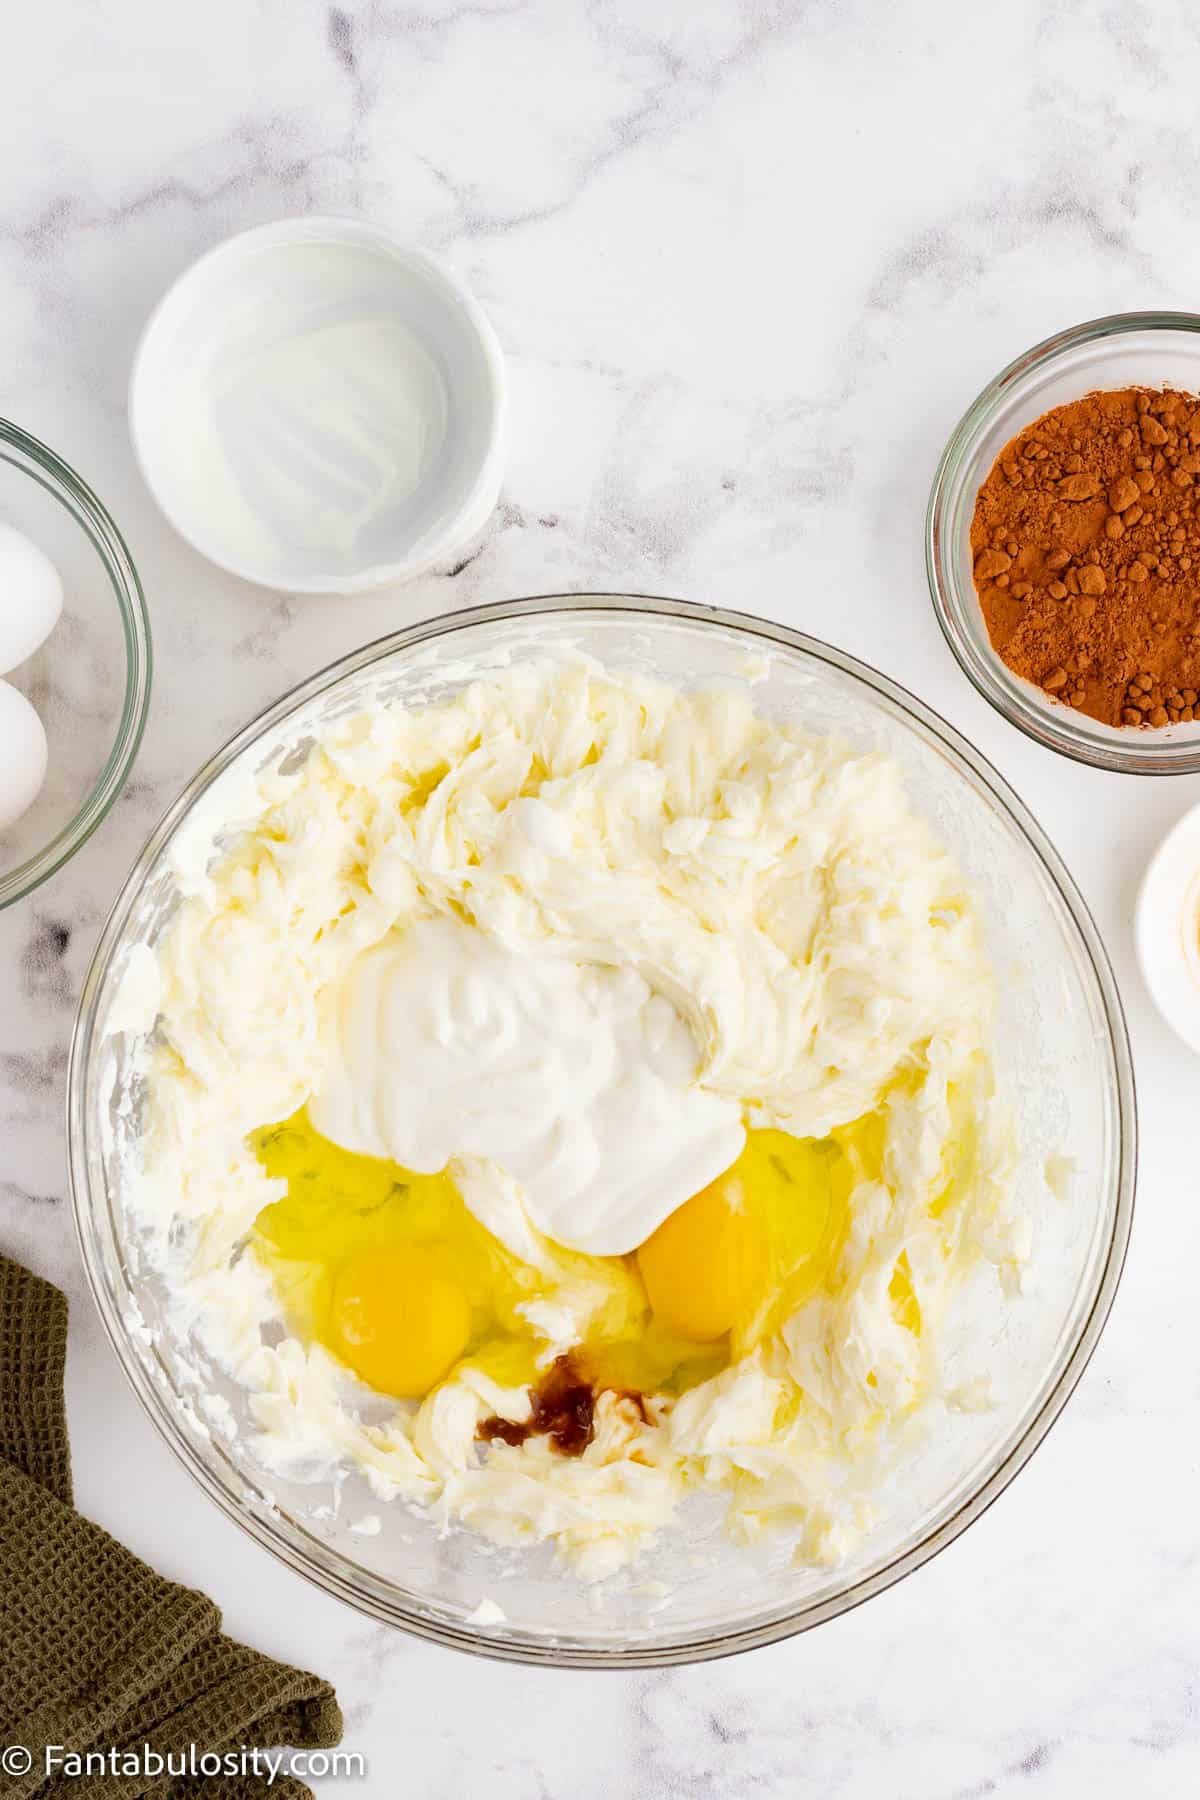 Eggs, sour cream and vanilla extract have been added to a cream cheese mixture in a large glass mixing bowl